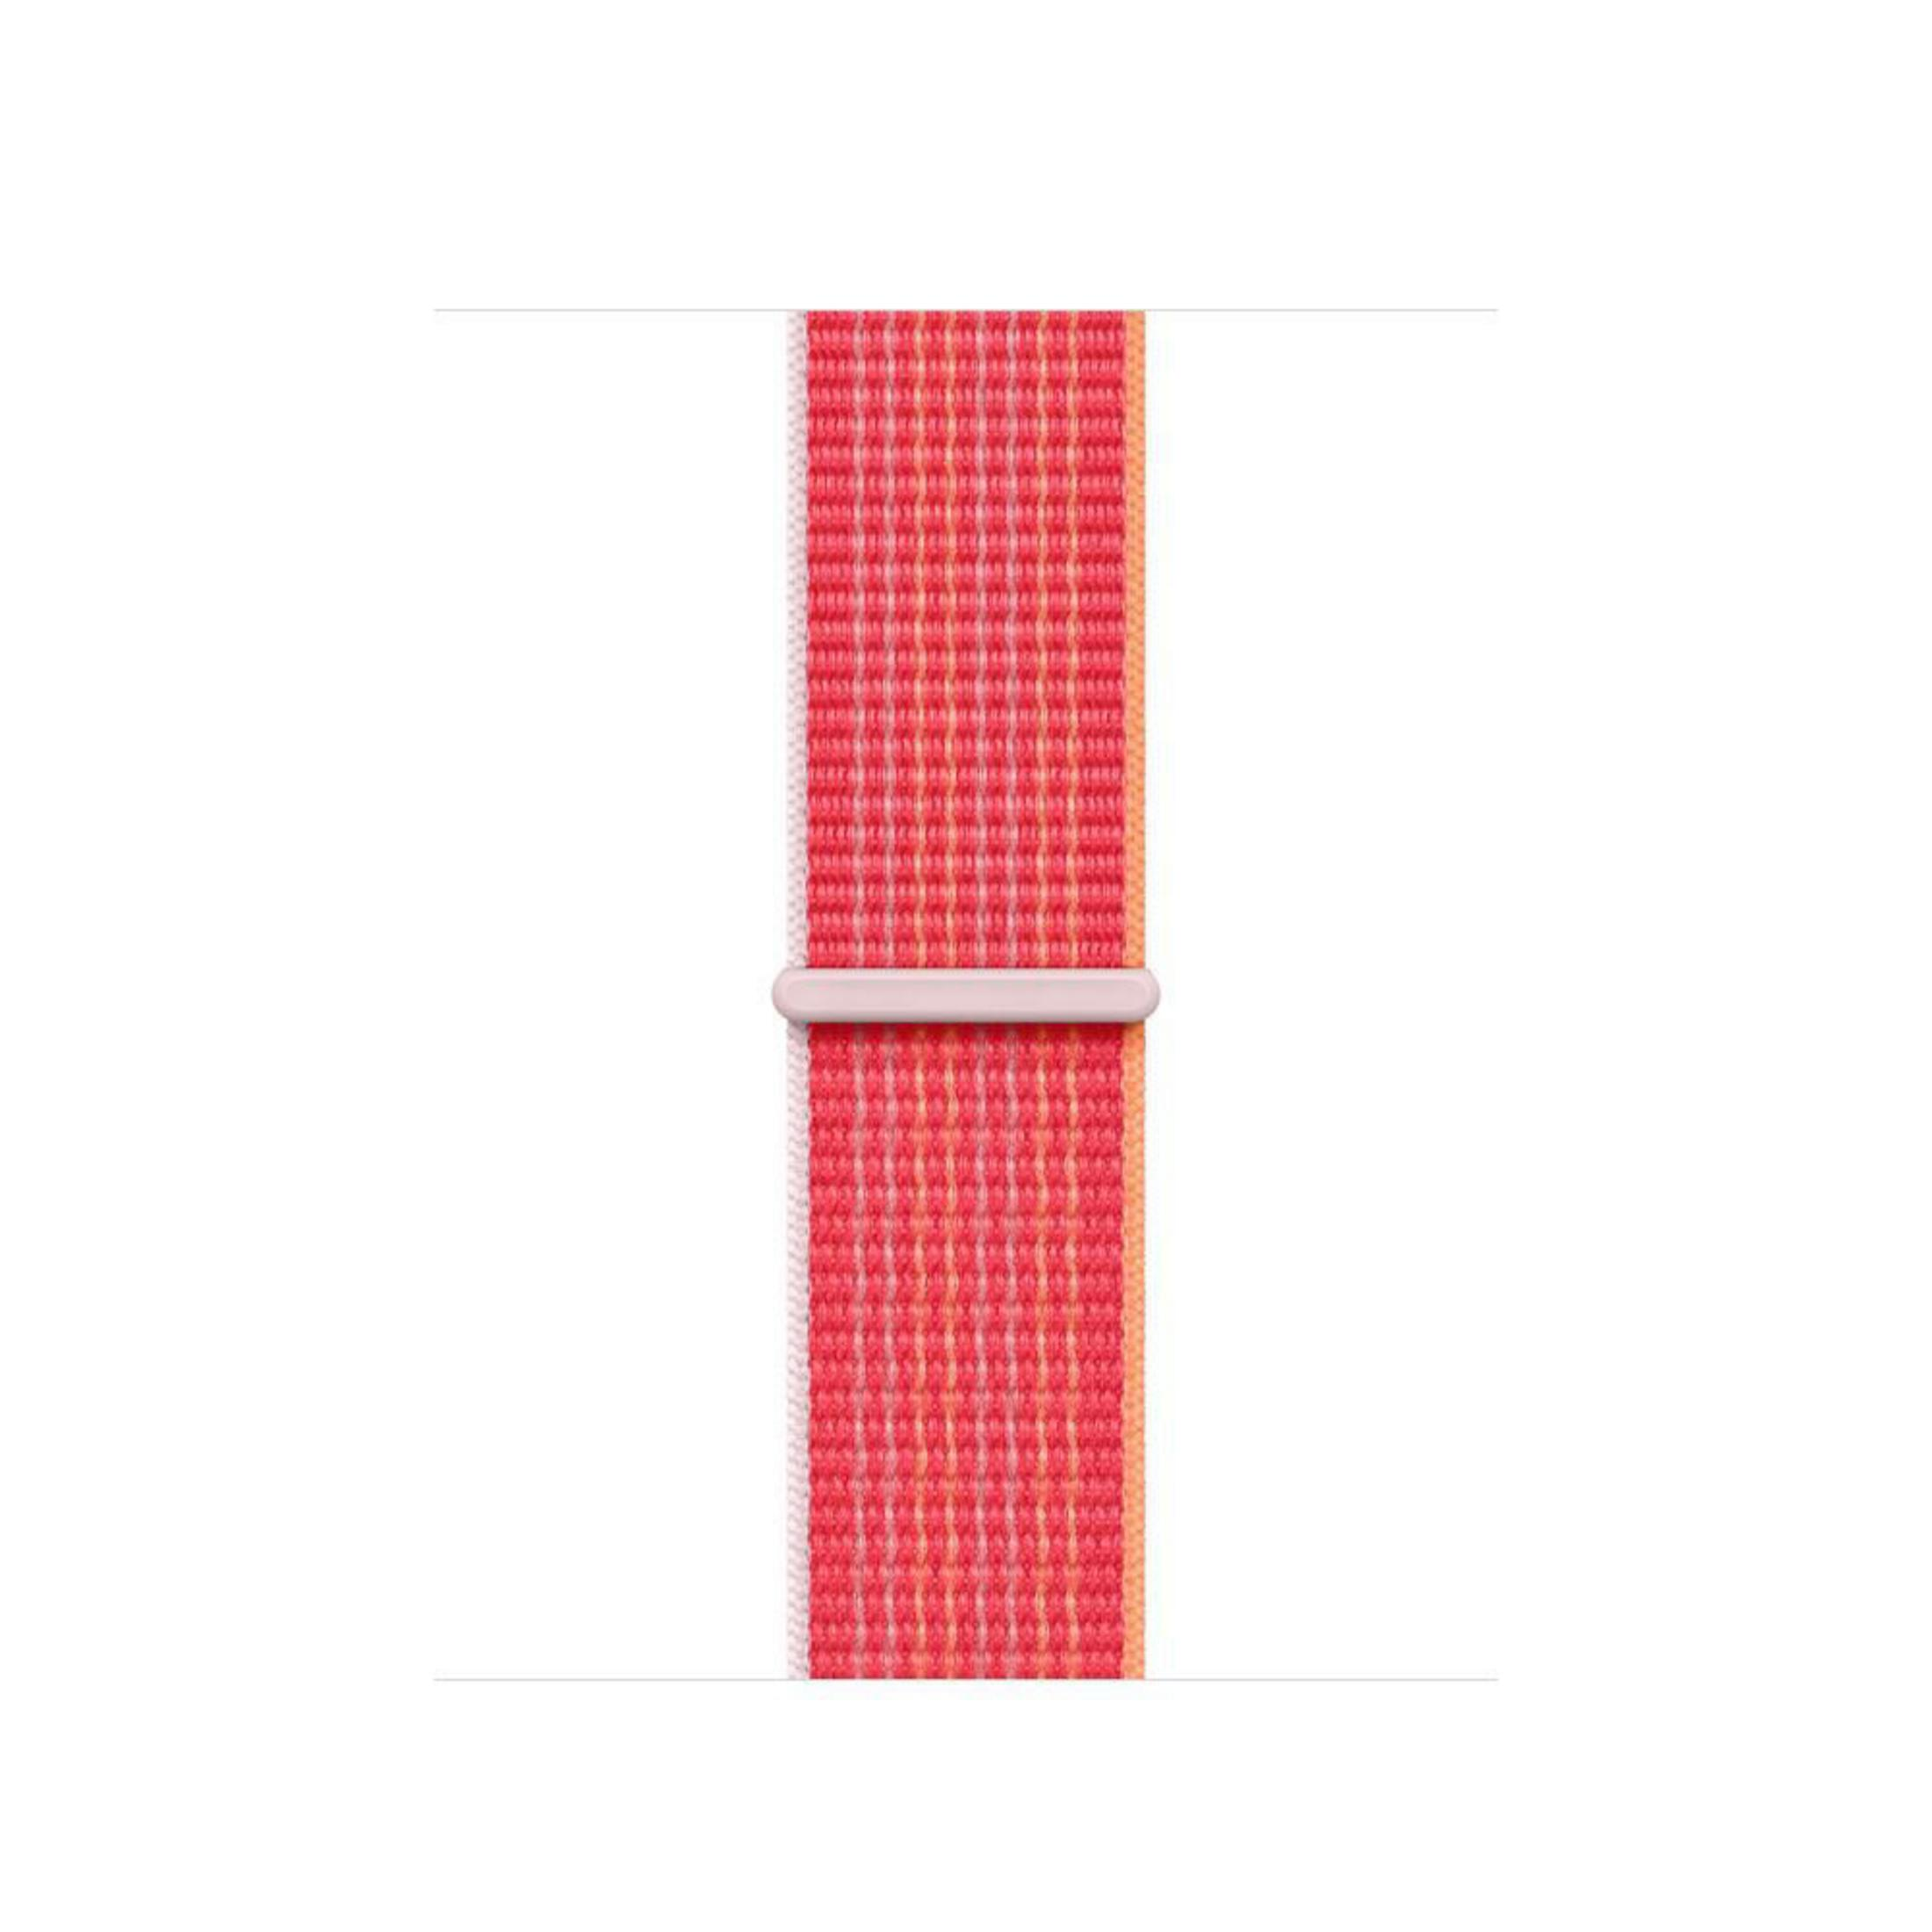 APPLE MPL83ZM/A 41MM 41 Product-Red SPORT 38 Ersatzarmband, Watch Apple, 40 mm, mm, mm, RED LOOP, Modelle